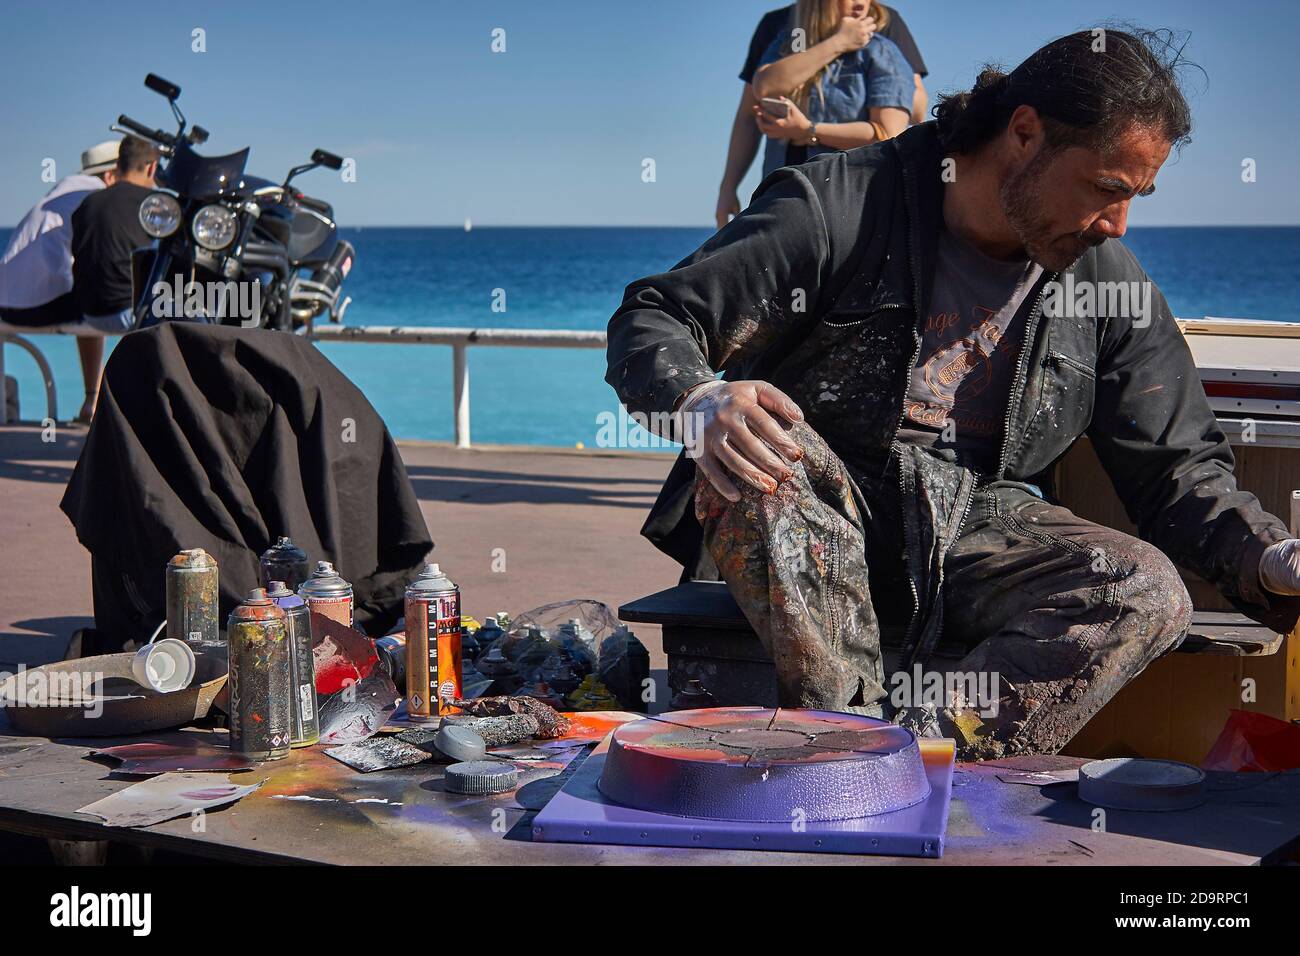 NICE, FRANCE 26 FEBRUARY 2020: Street artists in Nice, France Stock Photo